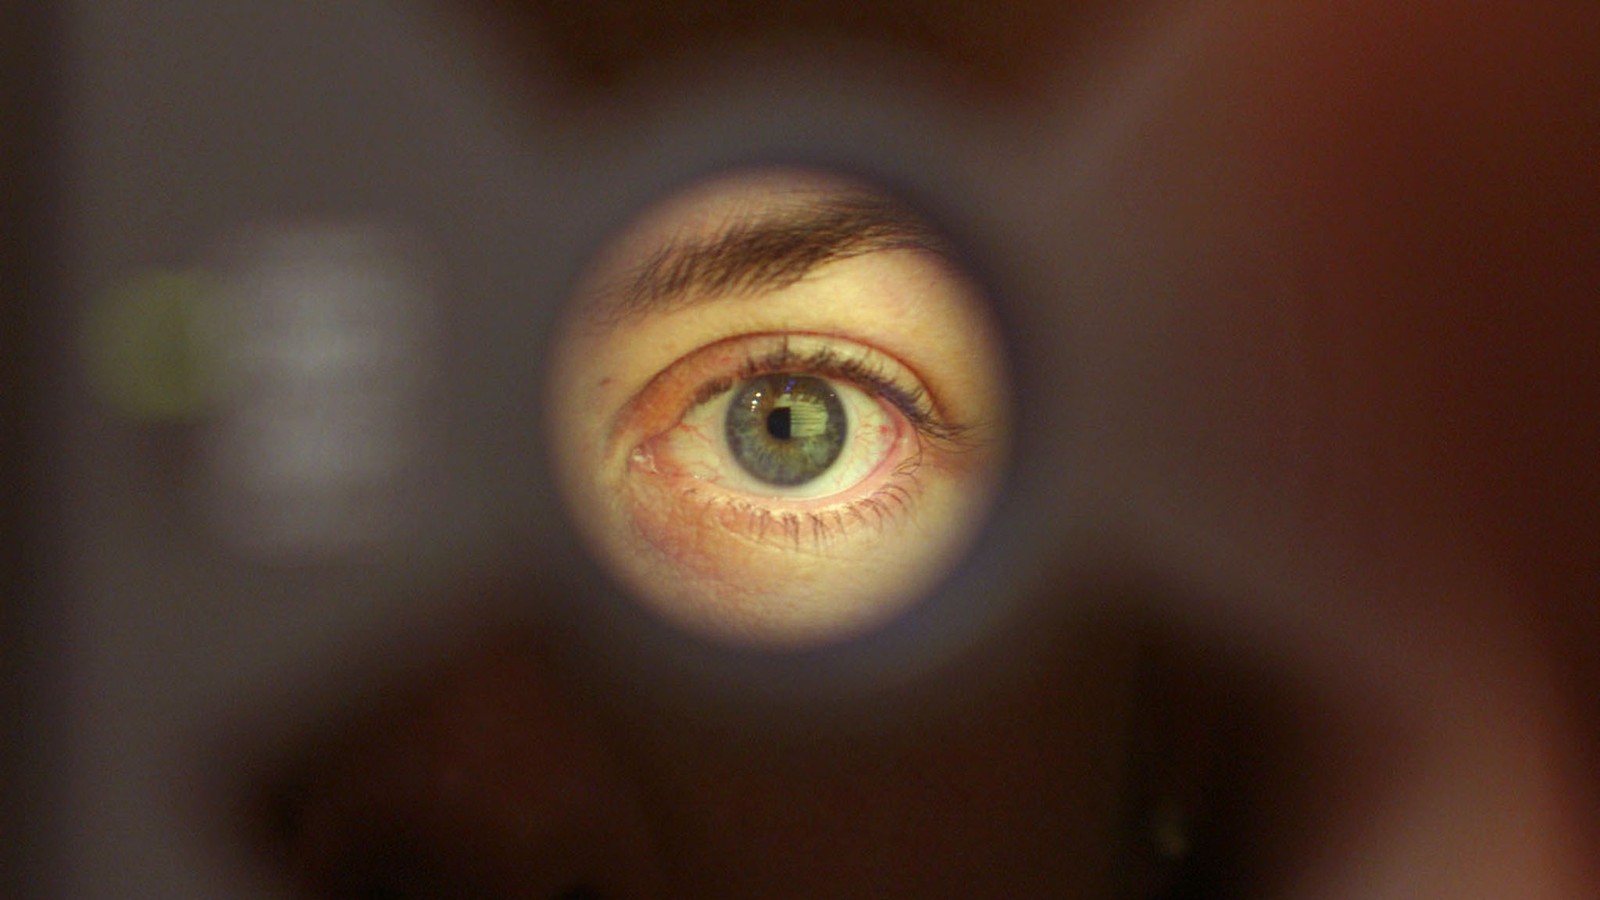 Iris recognition and retinal scans are not the same - Iris ID